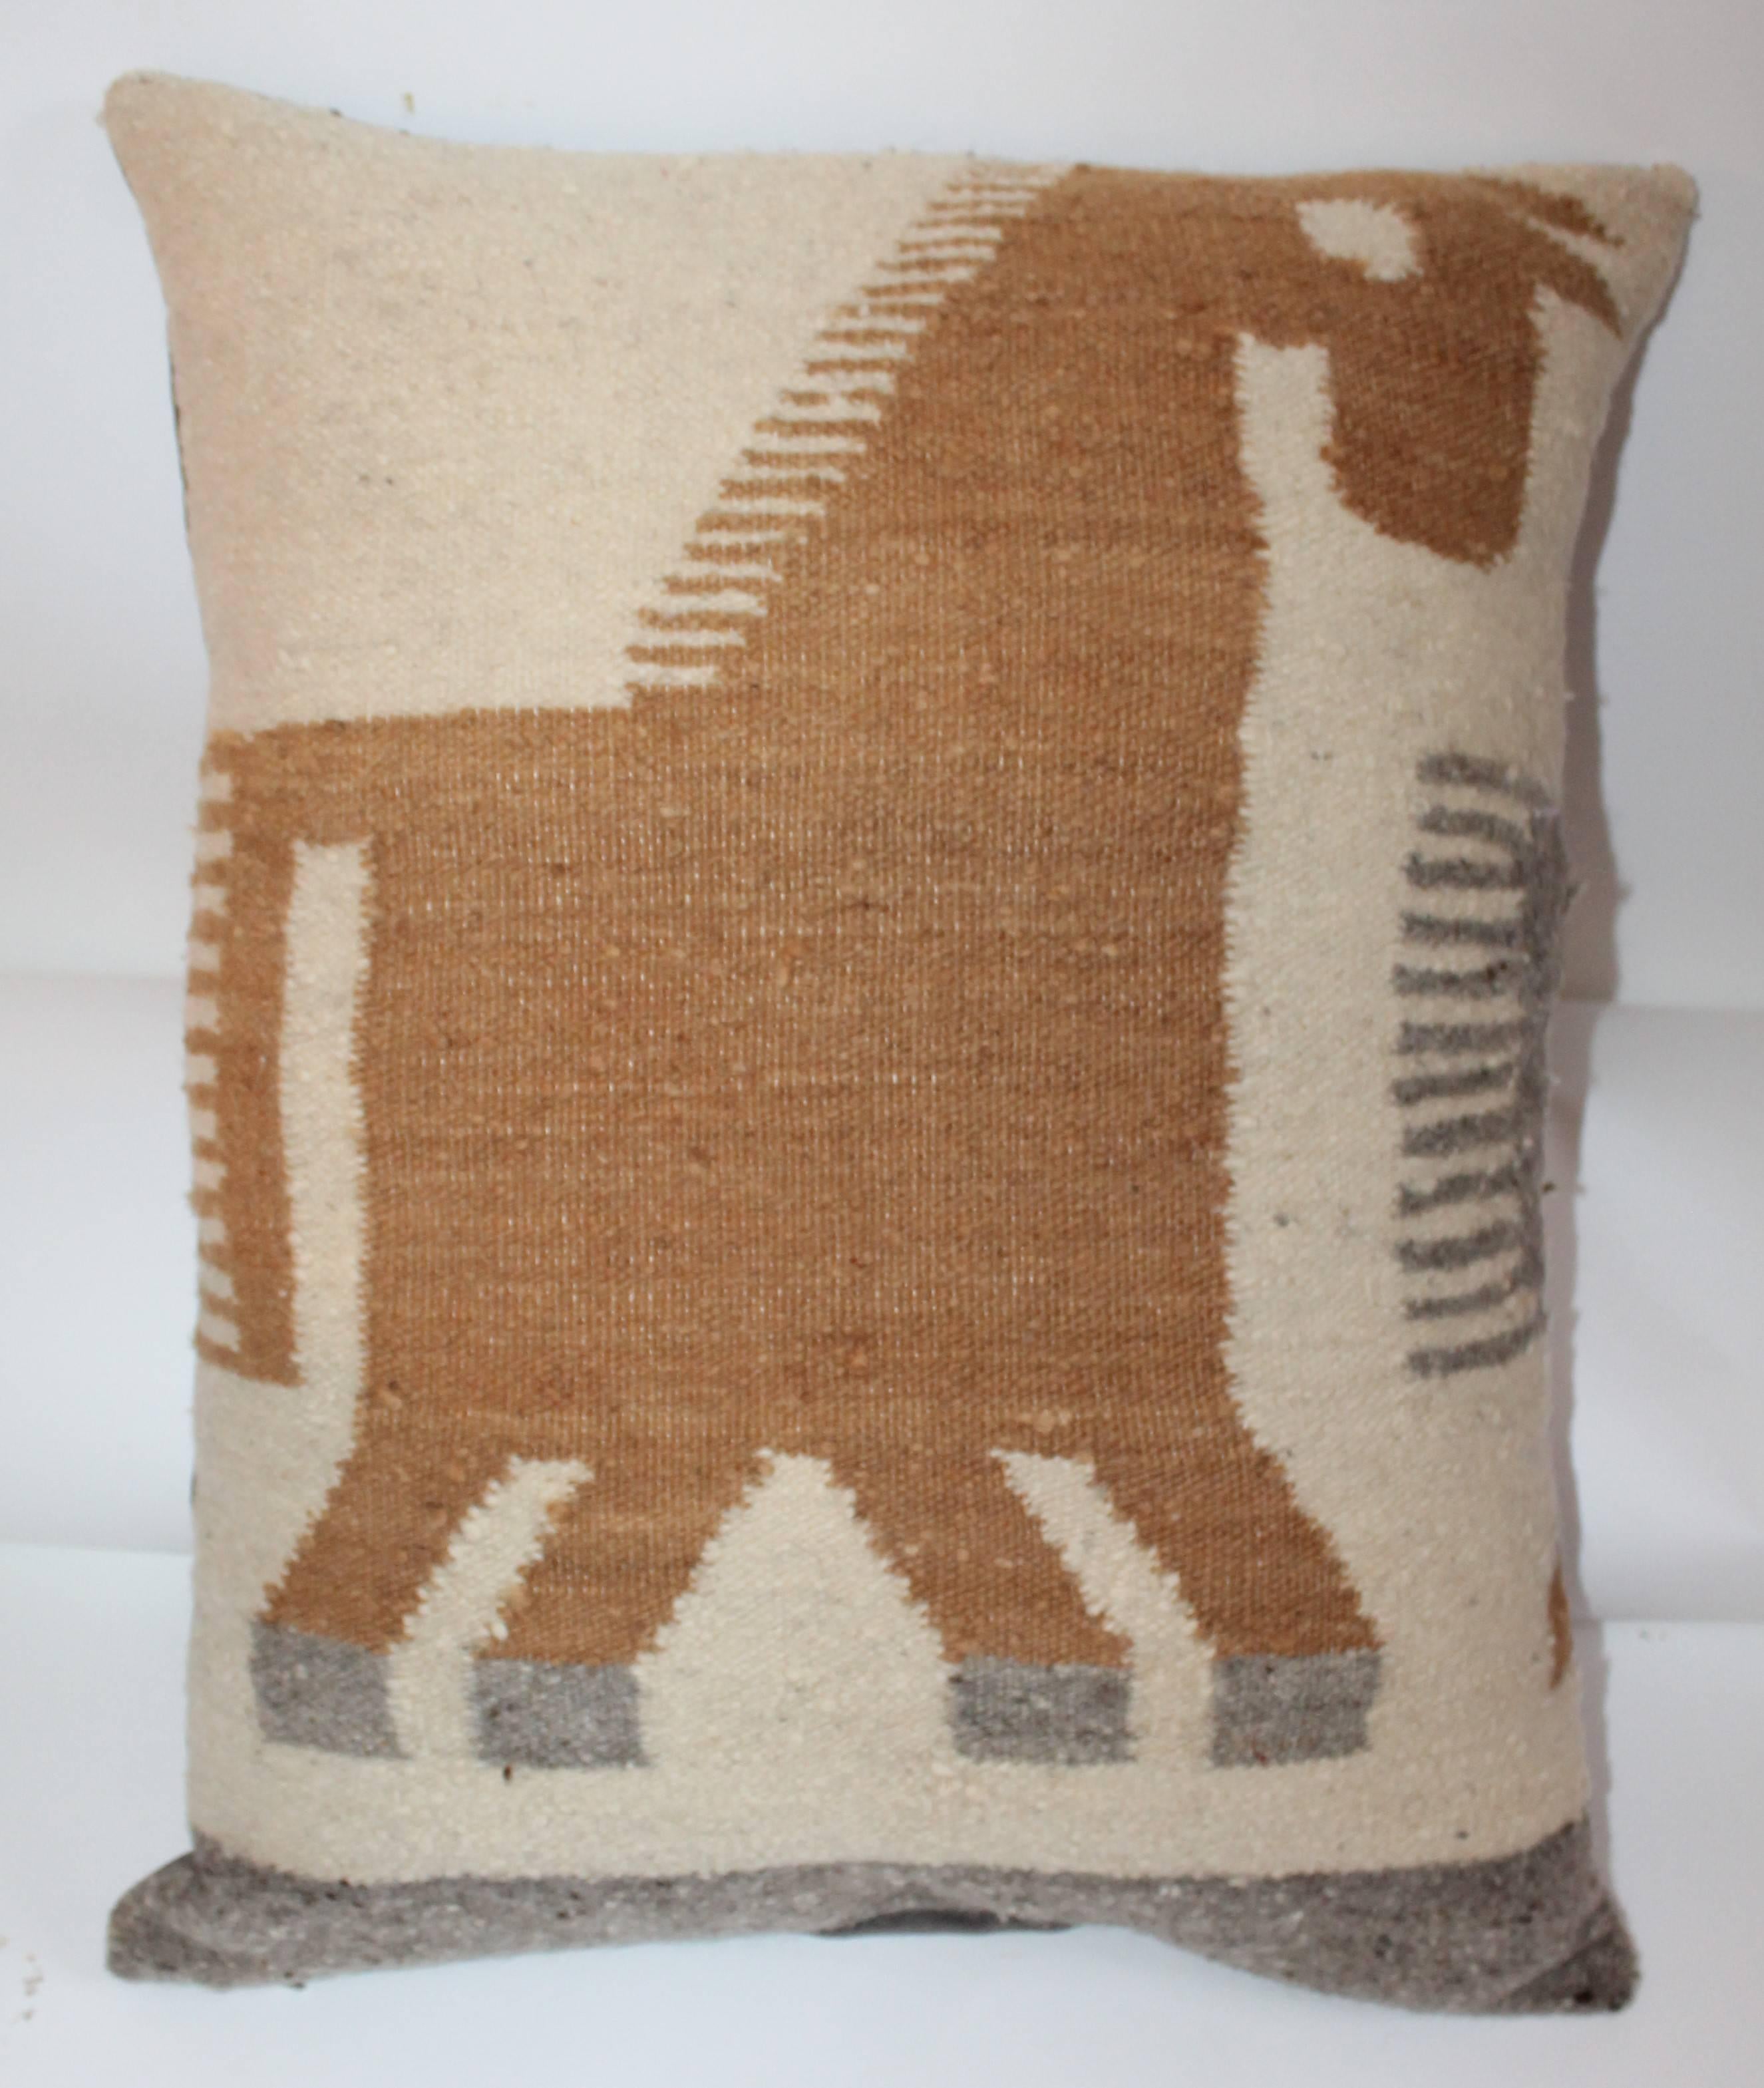 This folky handwoven Peruvian Indian weaving is in great condition and has a taupe cotton linen backing.